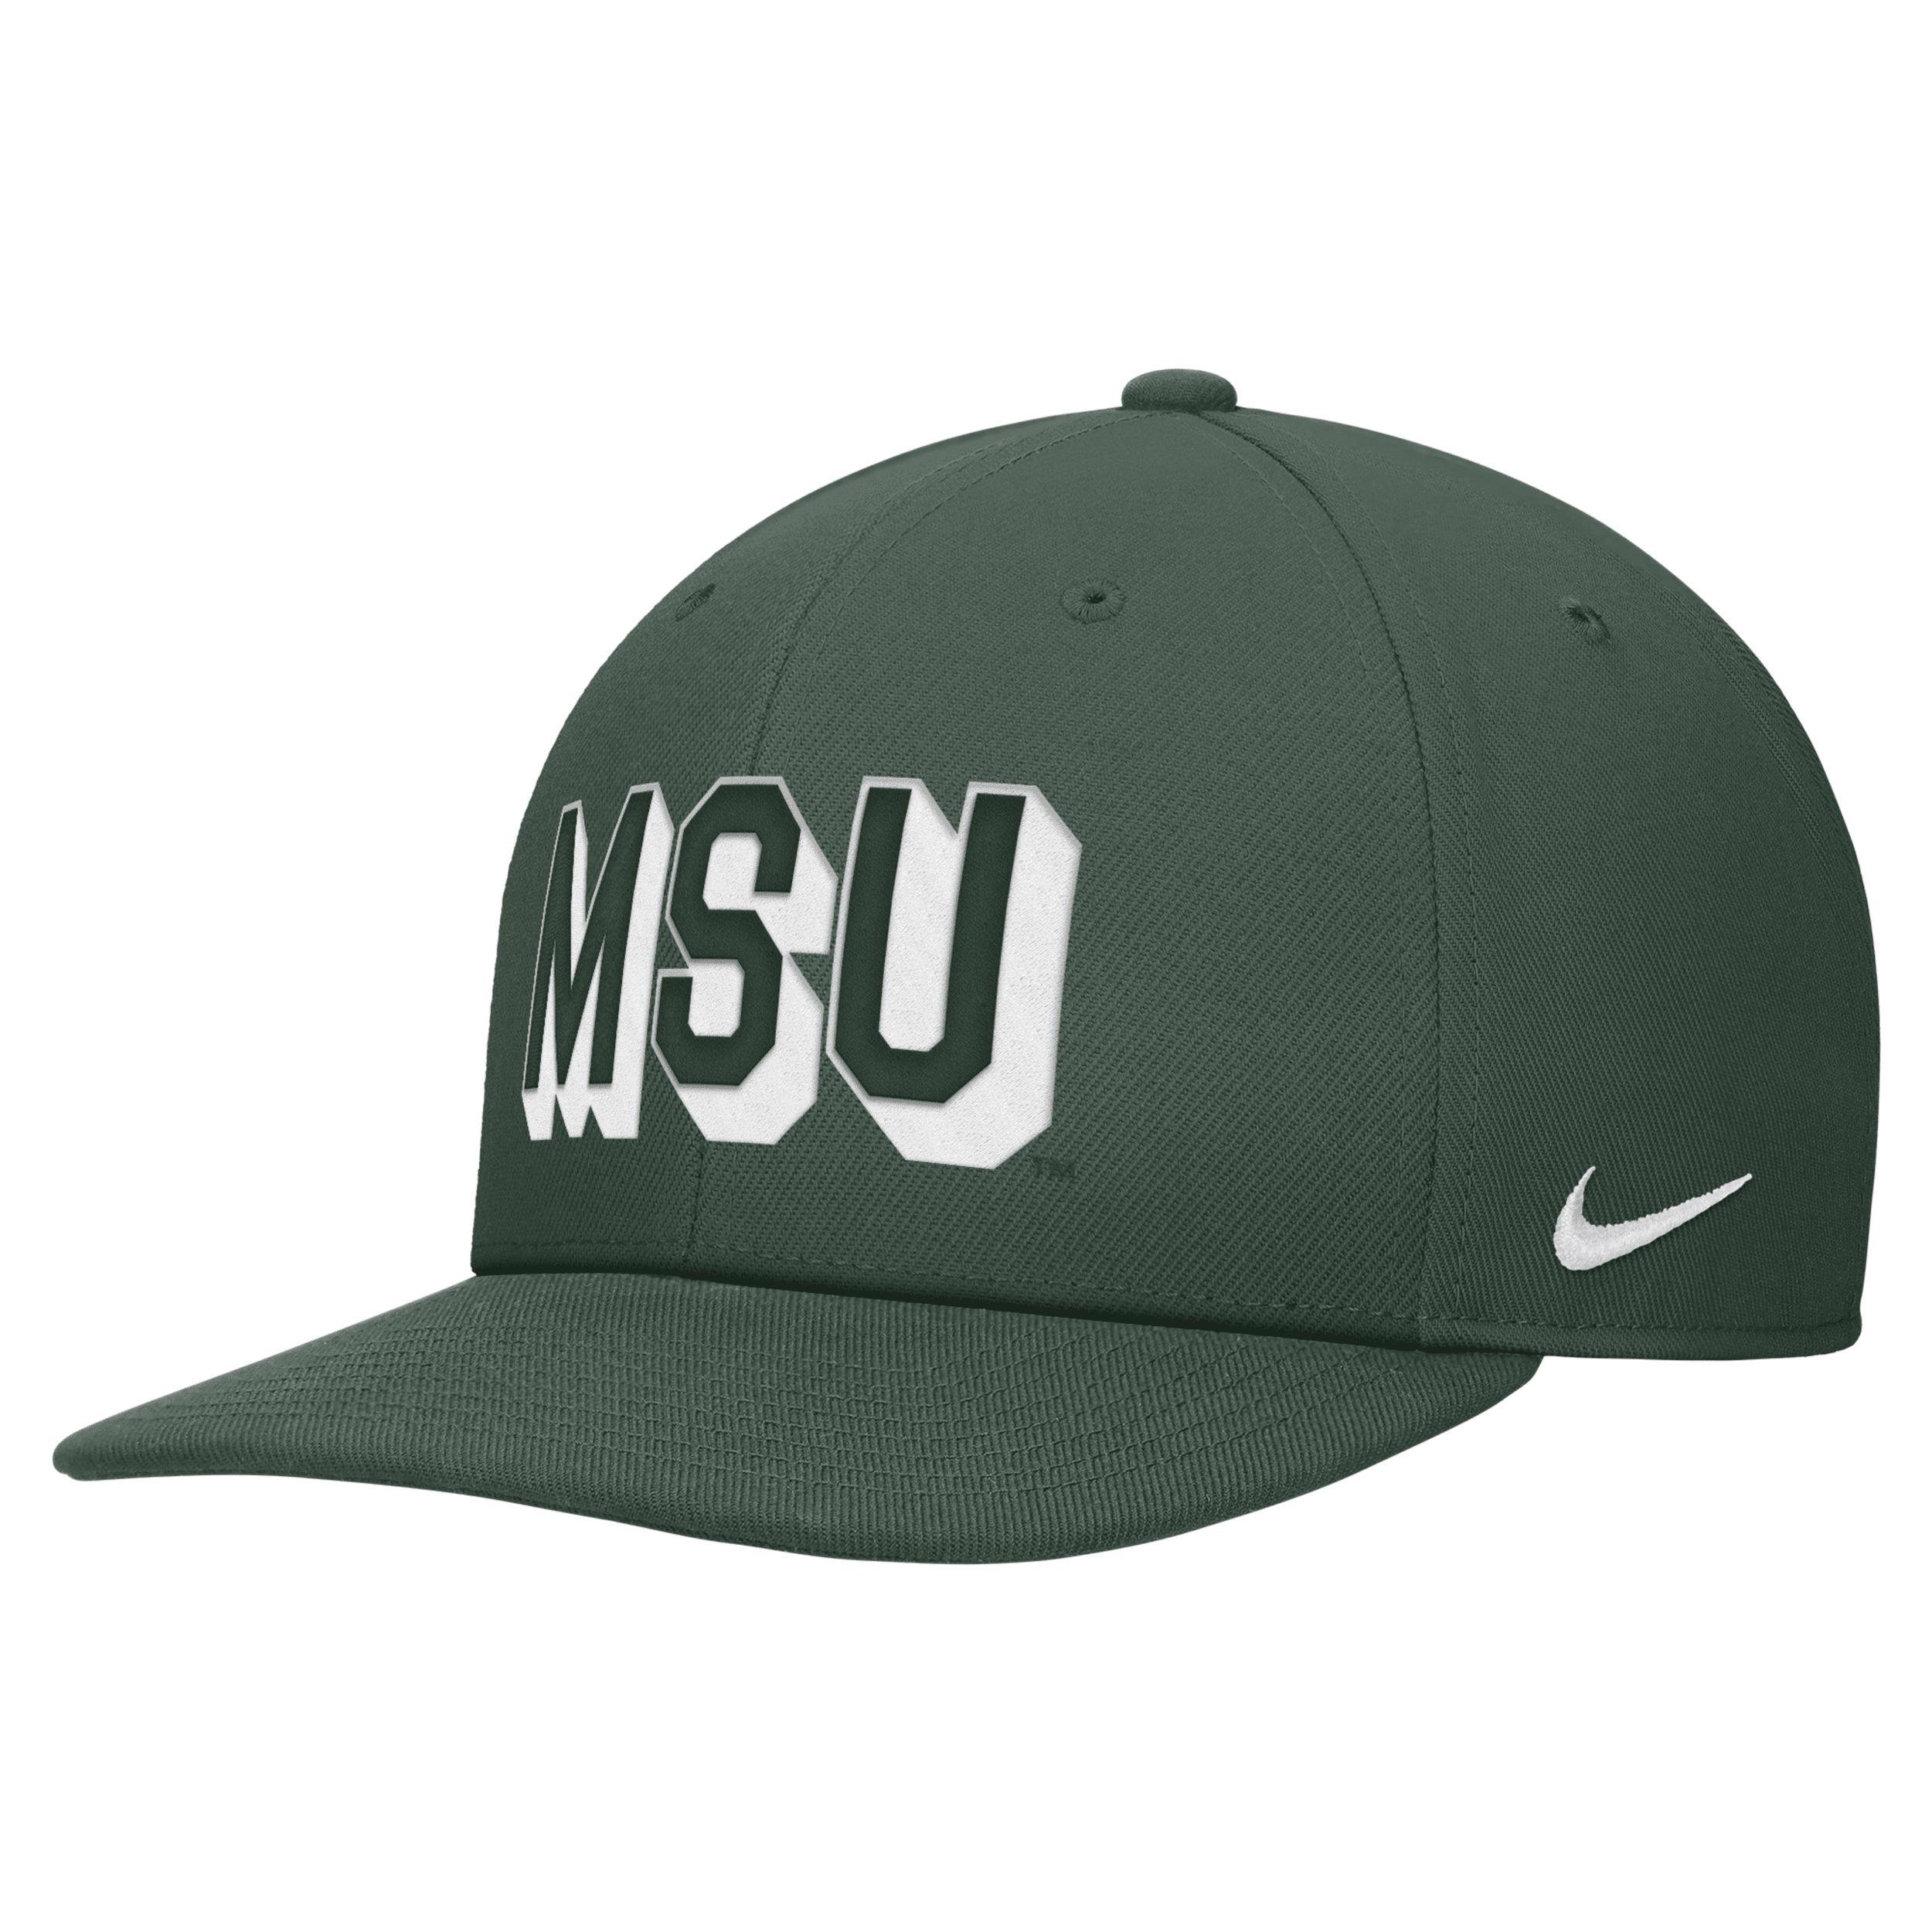 Michigan State Nike Unisex College Snapback Hat by NIKE